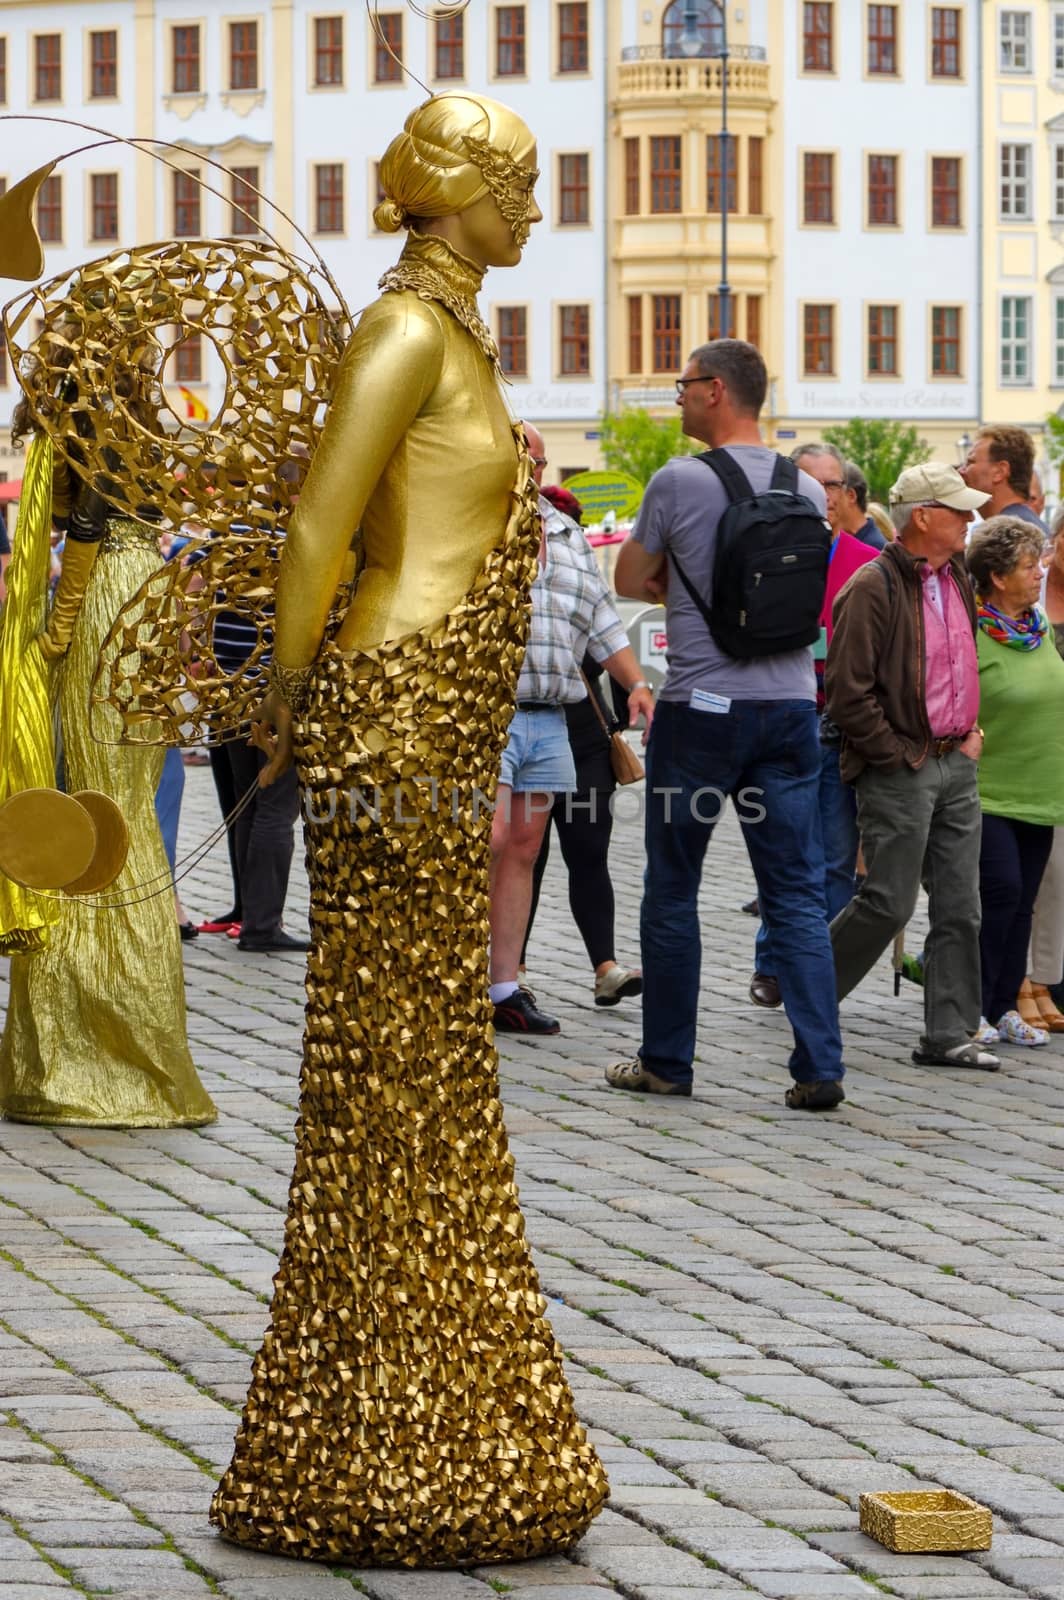 DRESDEN, GERMANY - JULY 13, 2015: a performer - Golden painted artists on a city street, living statues by evolutionnow